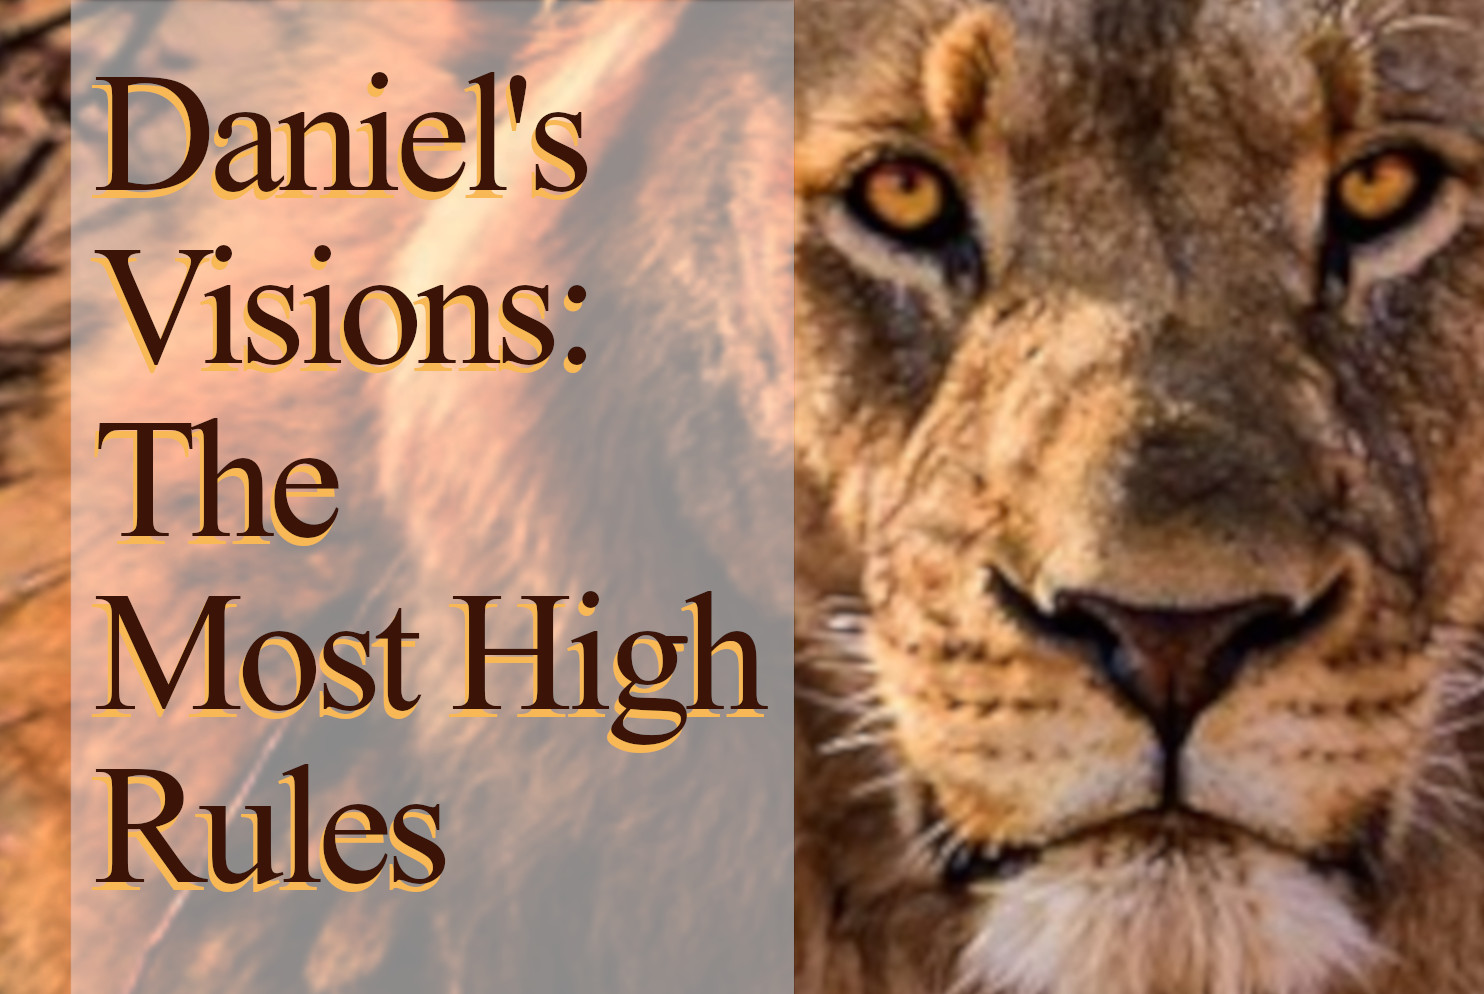 'Daniel's Visions: The  Most High Rules' sermon series by Nathan Clarke